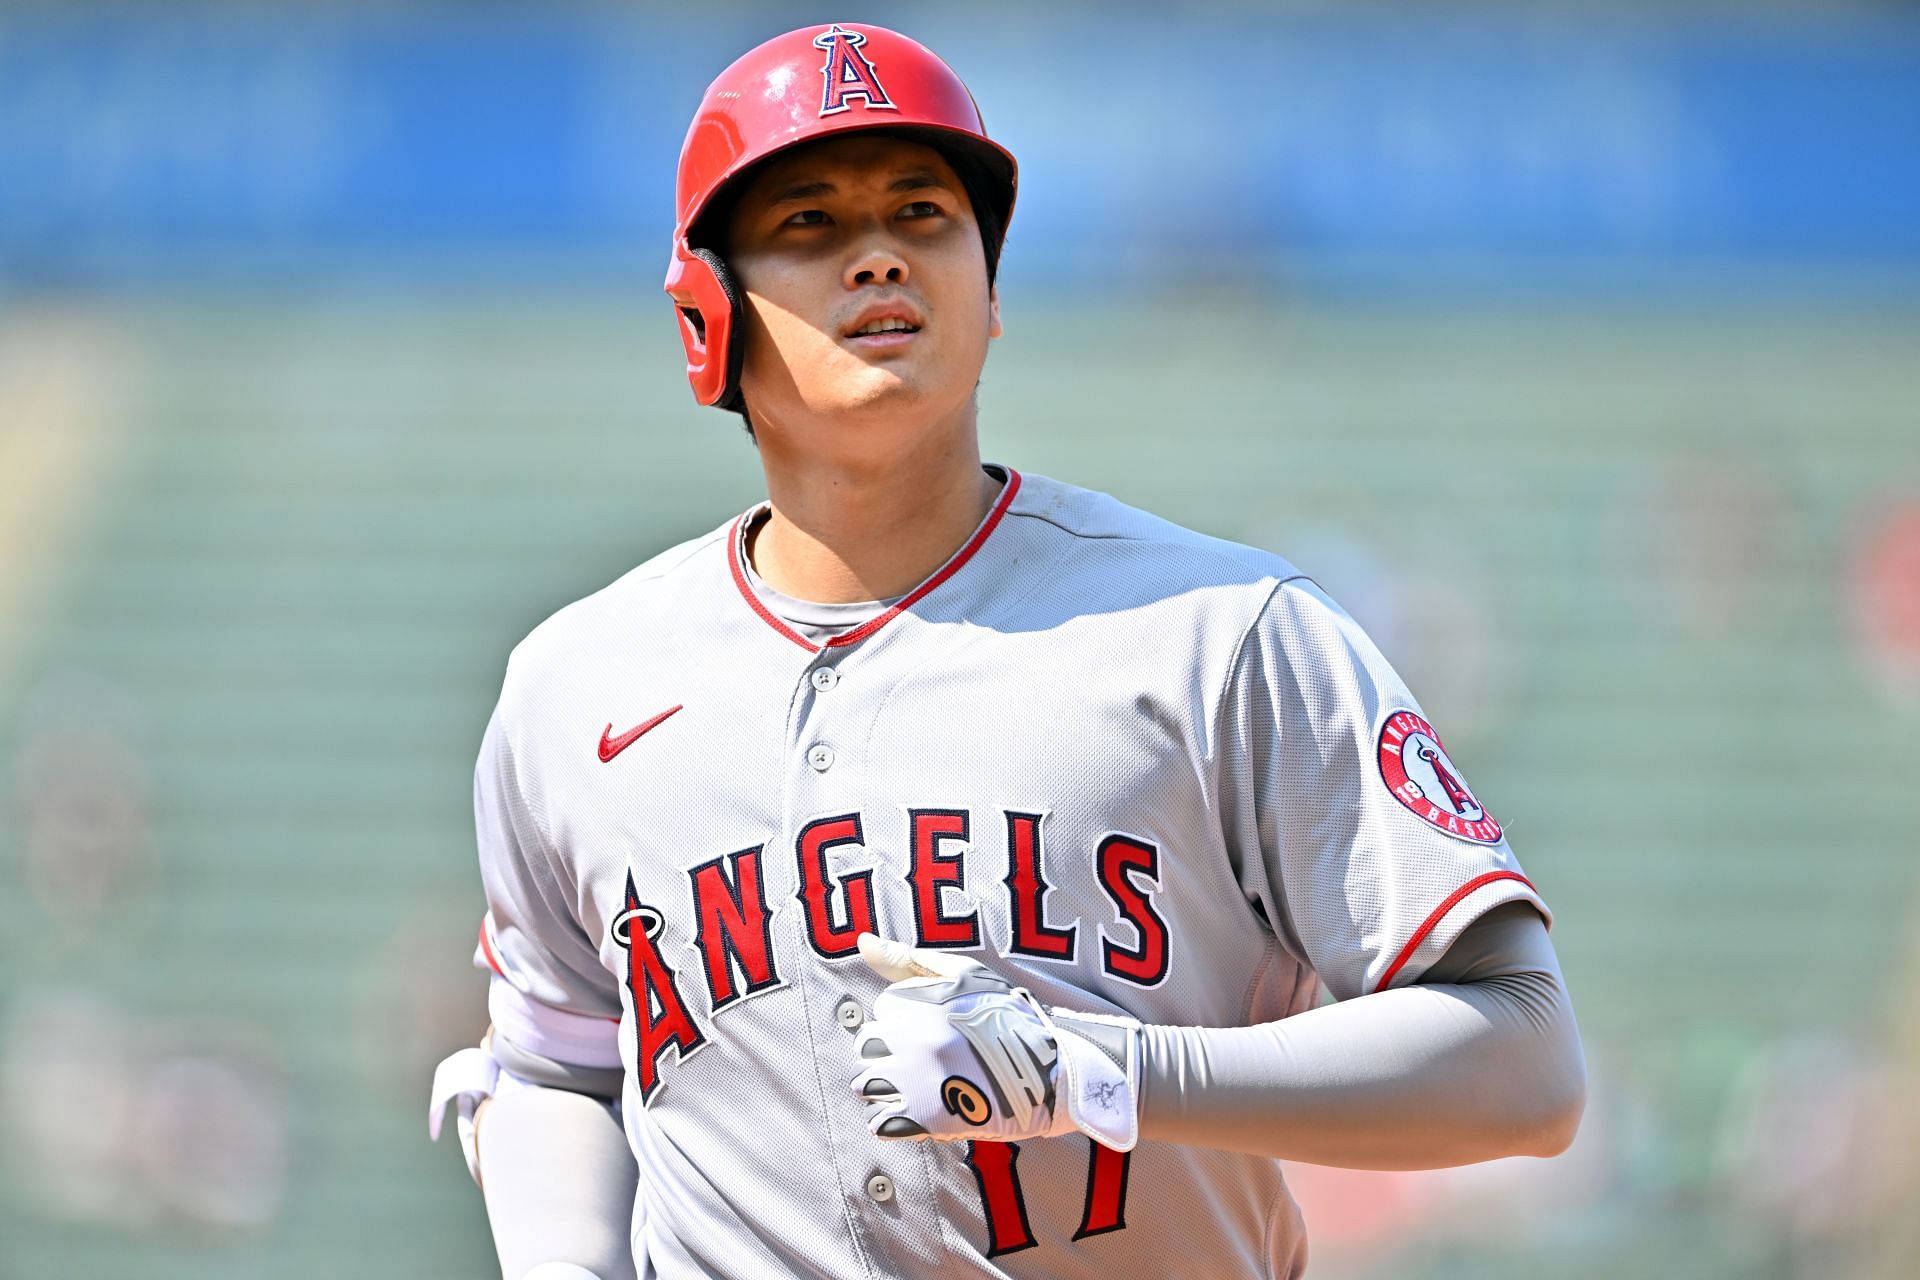 shohei ohtani weight: Shohei Ohtani Weight: How heavy is the Angels'  two-way superstar?